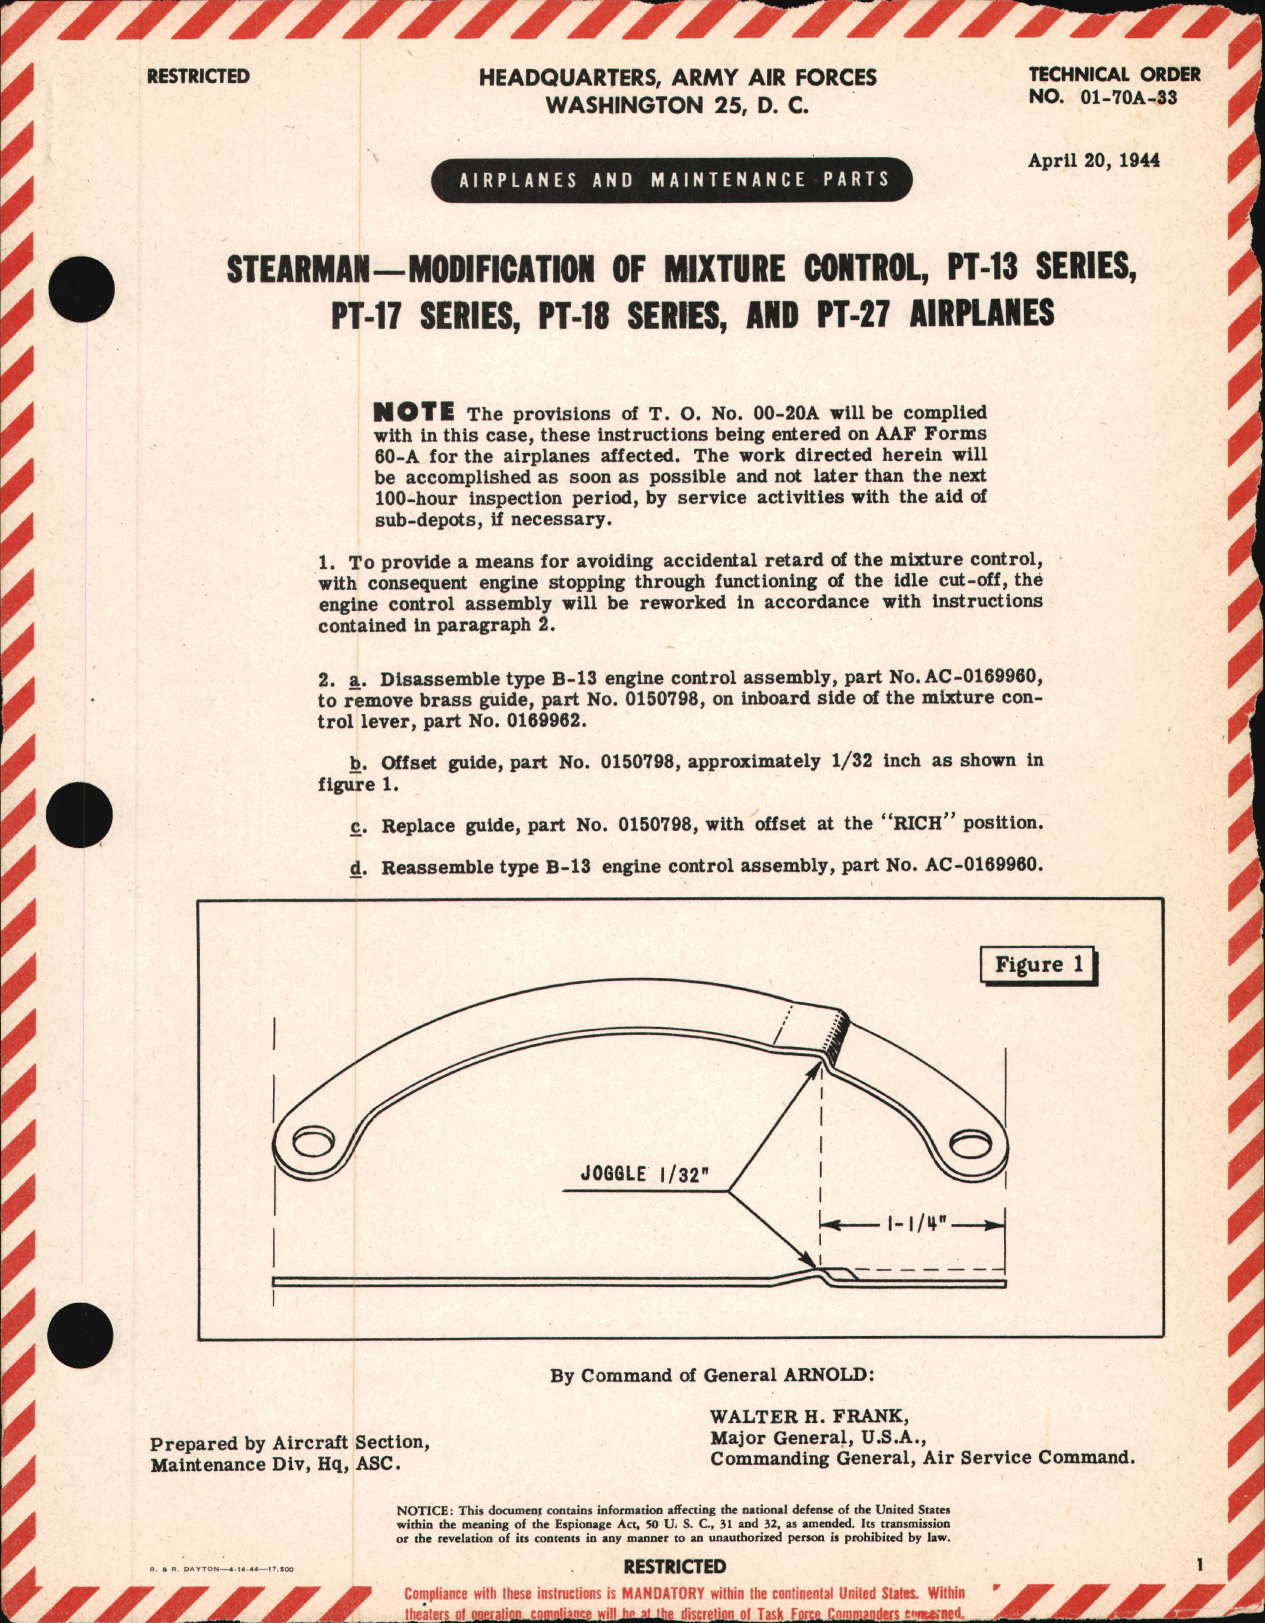 Sample page 1 from AirCorps Library document: Modification of Mixture Control for PT-13, -17, -18 & -27